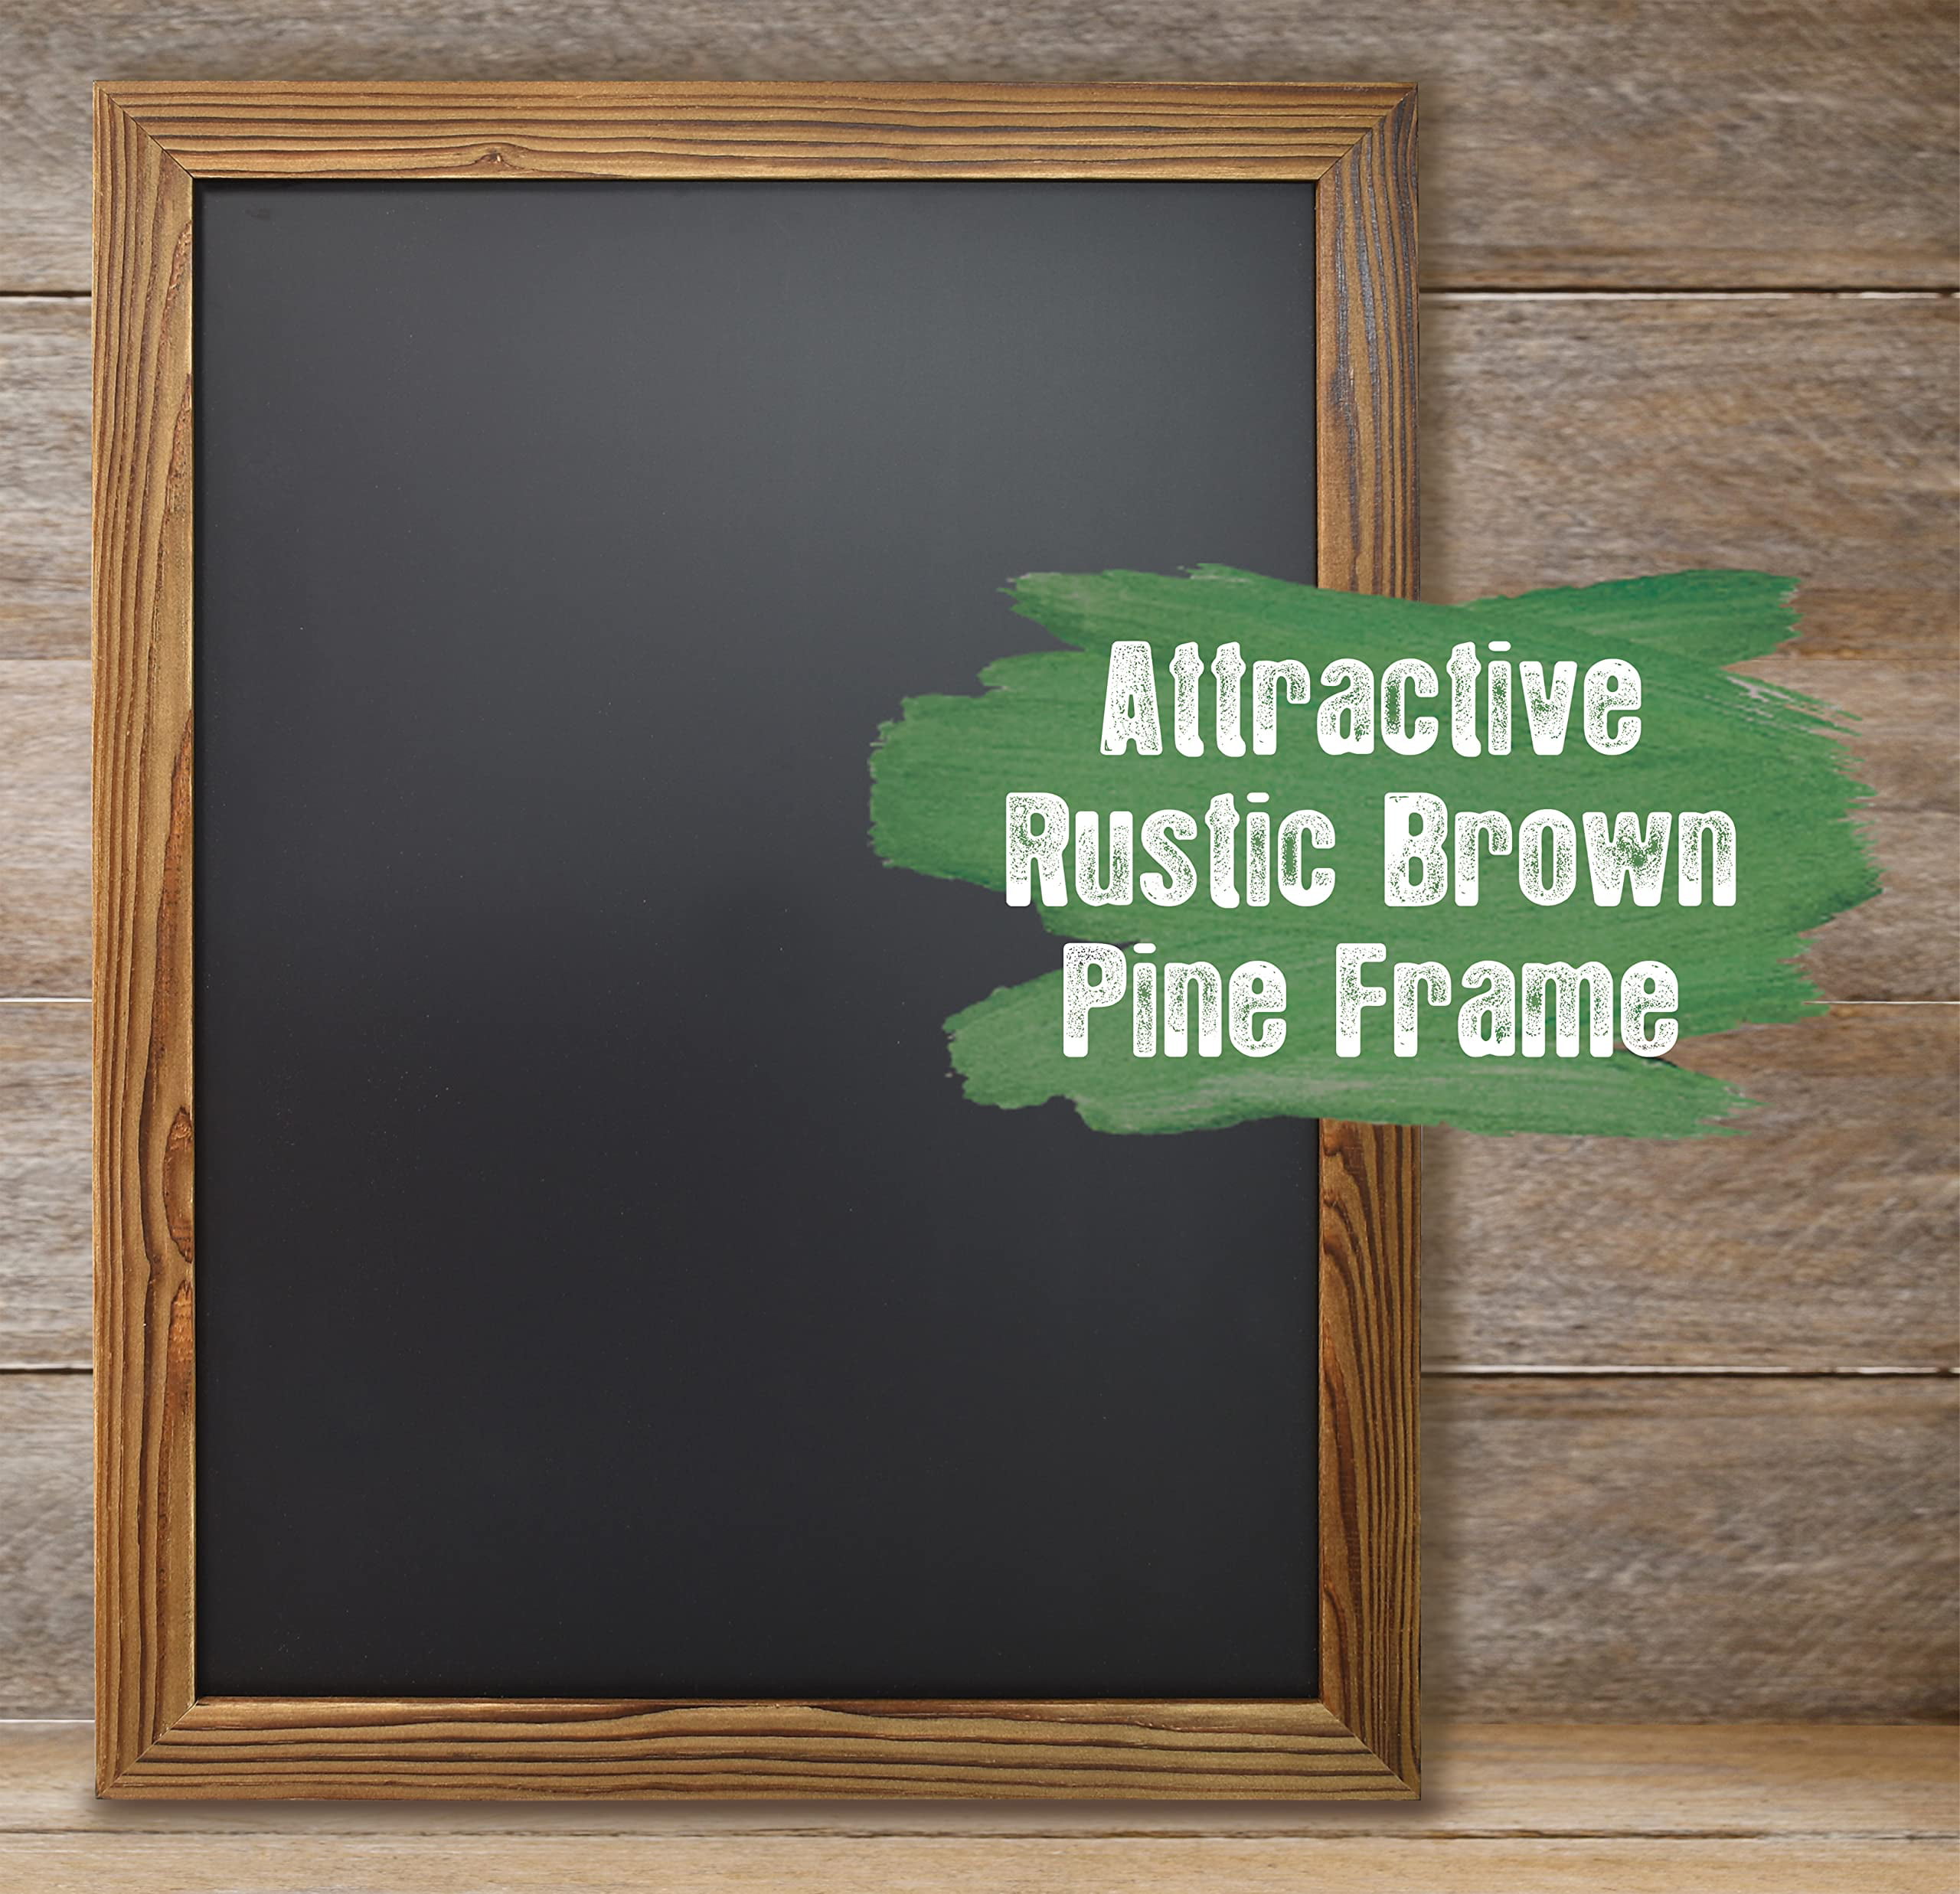  Wood Framed Chalkboard - Premium Magnetic 18 x 22 Rustic Chalk  Board, Great with Regular or Liquid Chalk Markers, Non Porous Wall Hanging  Blackboard Sign